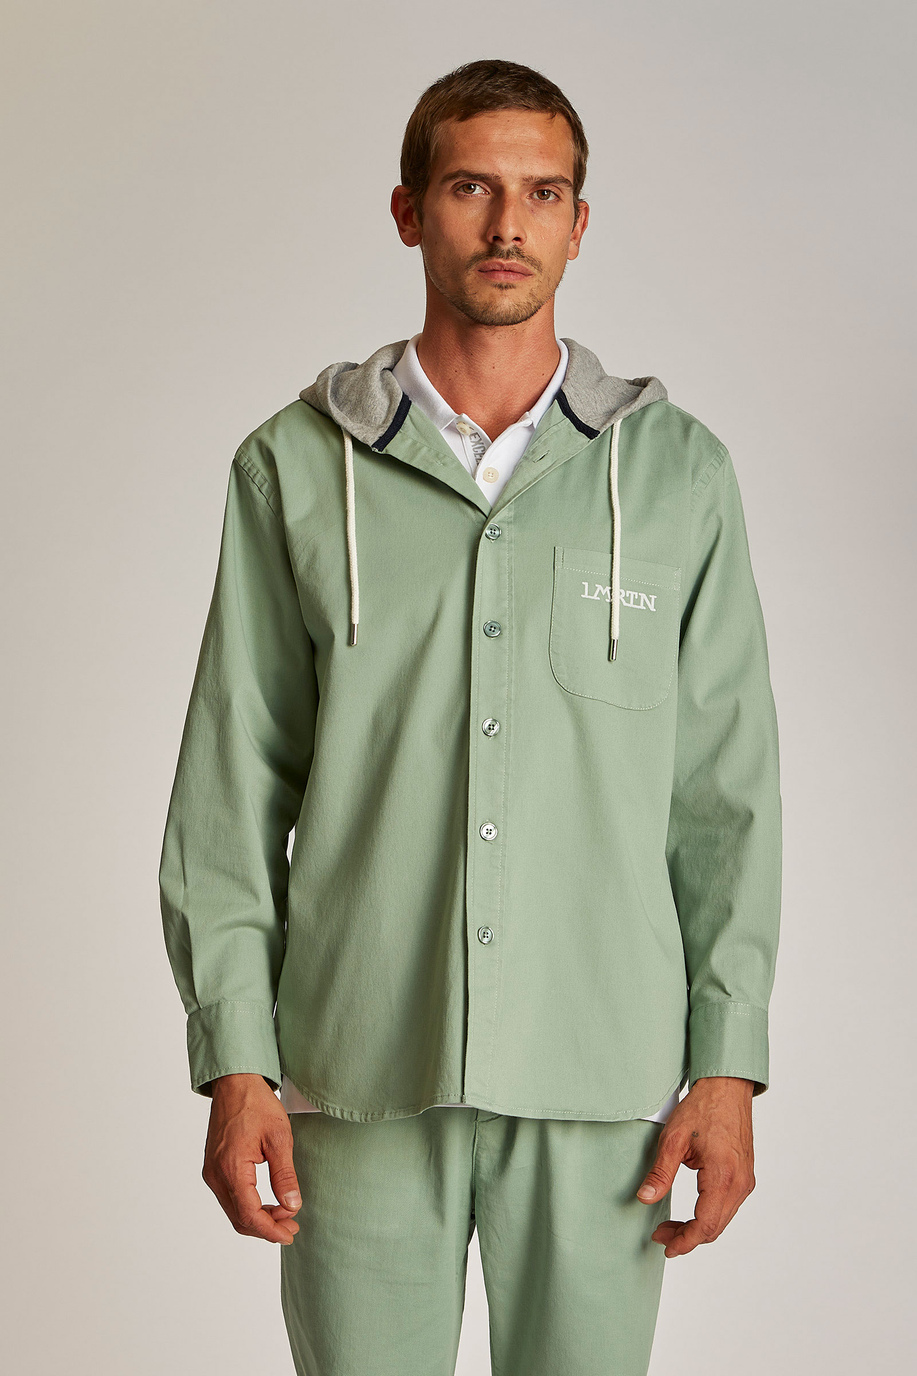 Men's oversized hooded jacket in 100% cotton fabric - -30% | step 3 | us | La Martina - Official Online Shop